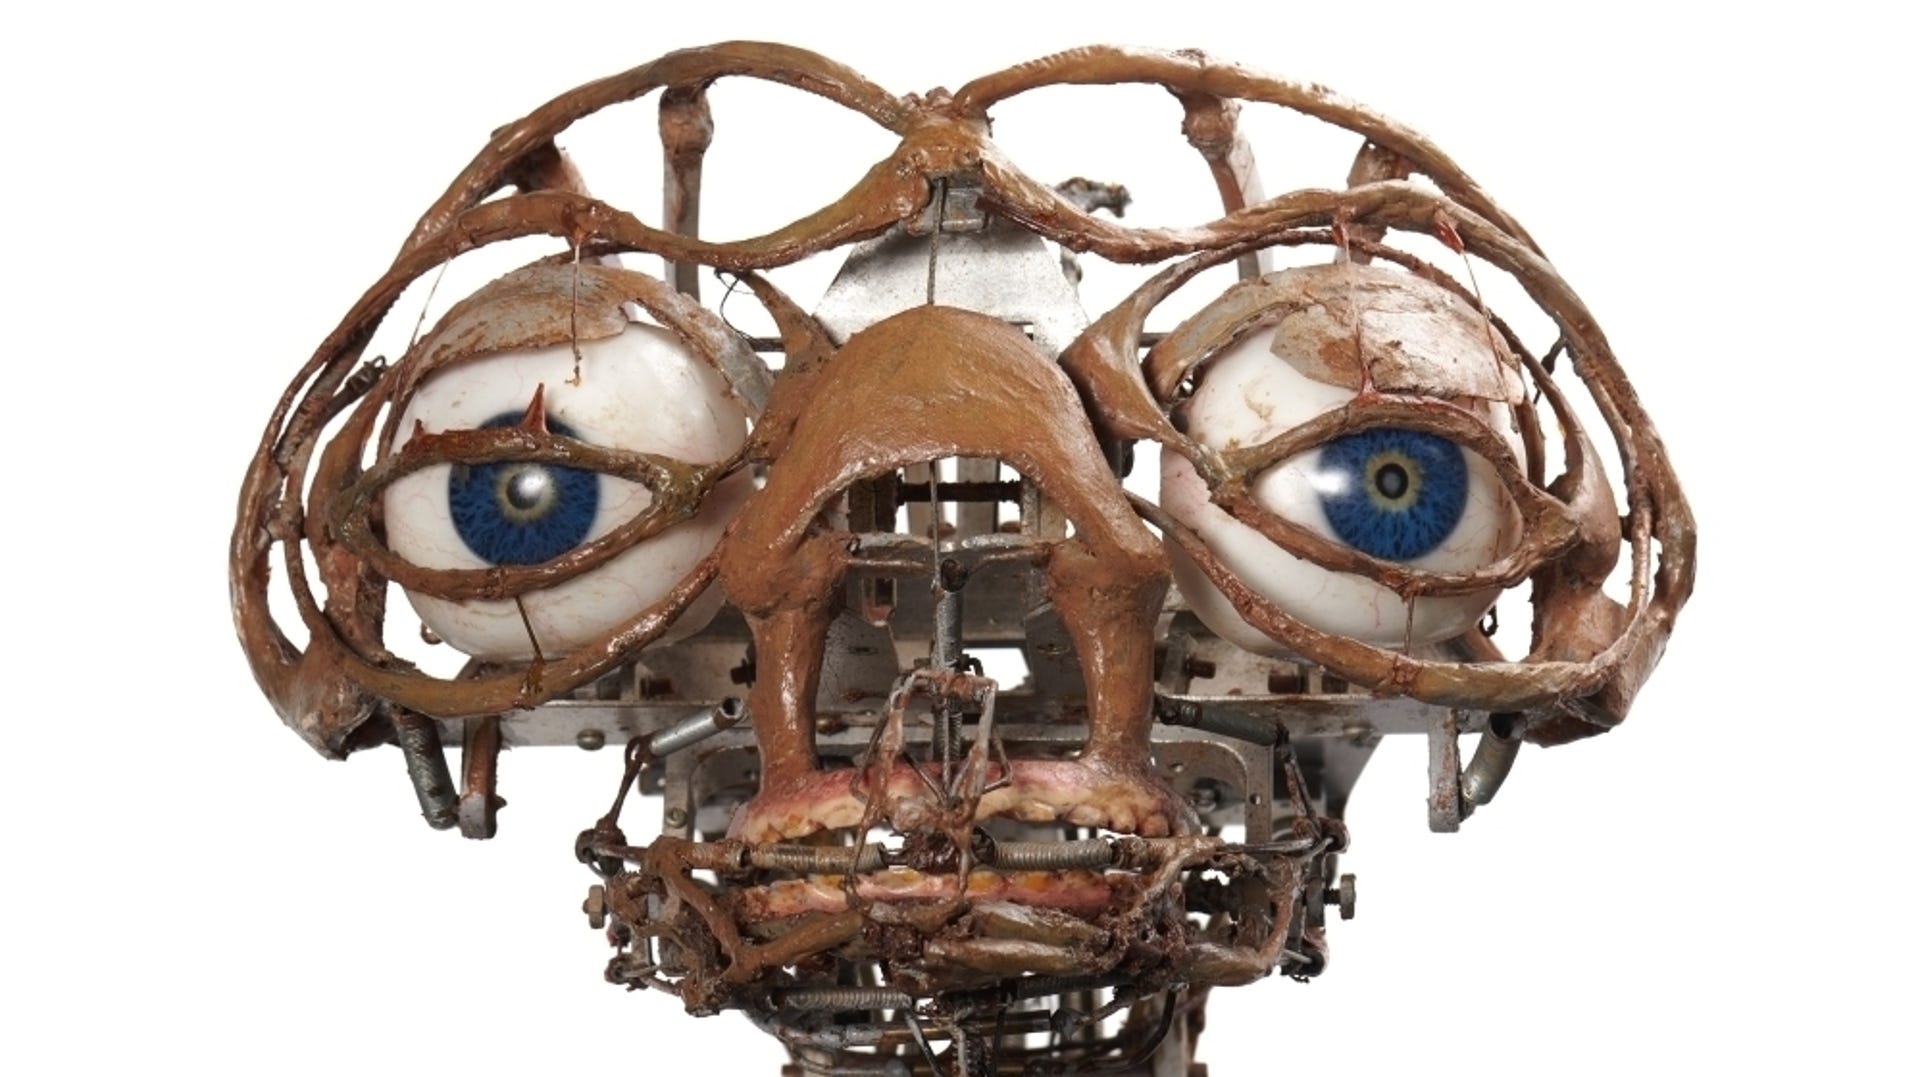 Skinless head of a mechatronic E.T. alien model used for filming looks like a skeleton with blue eyes peering out.